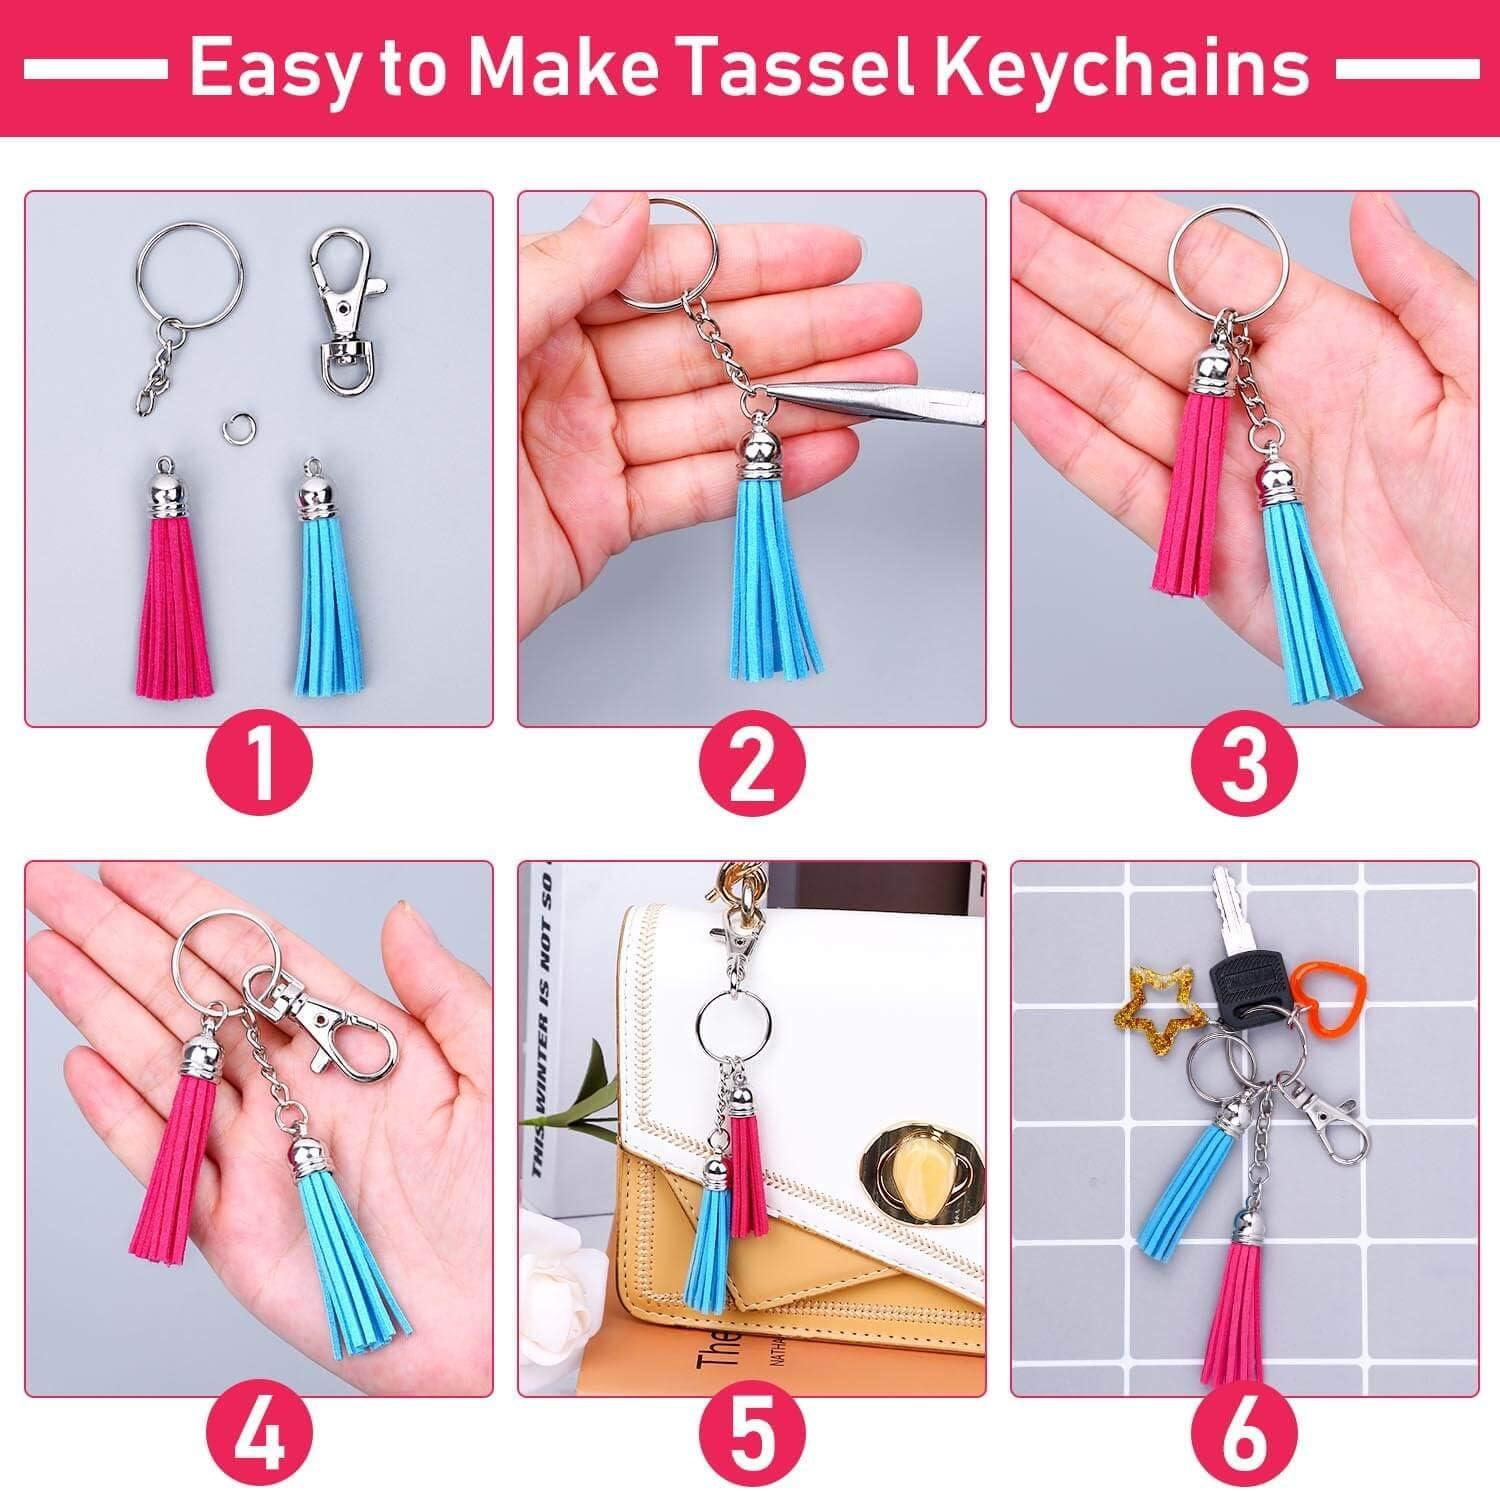 How to make easy and beautiful key chains with tassels or speckles